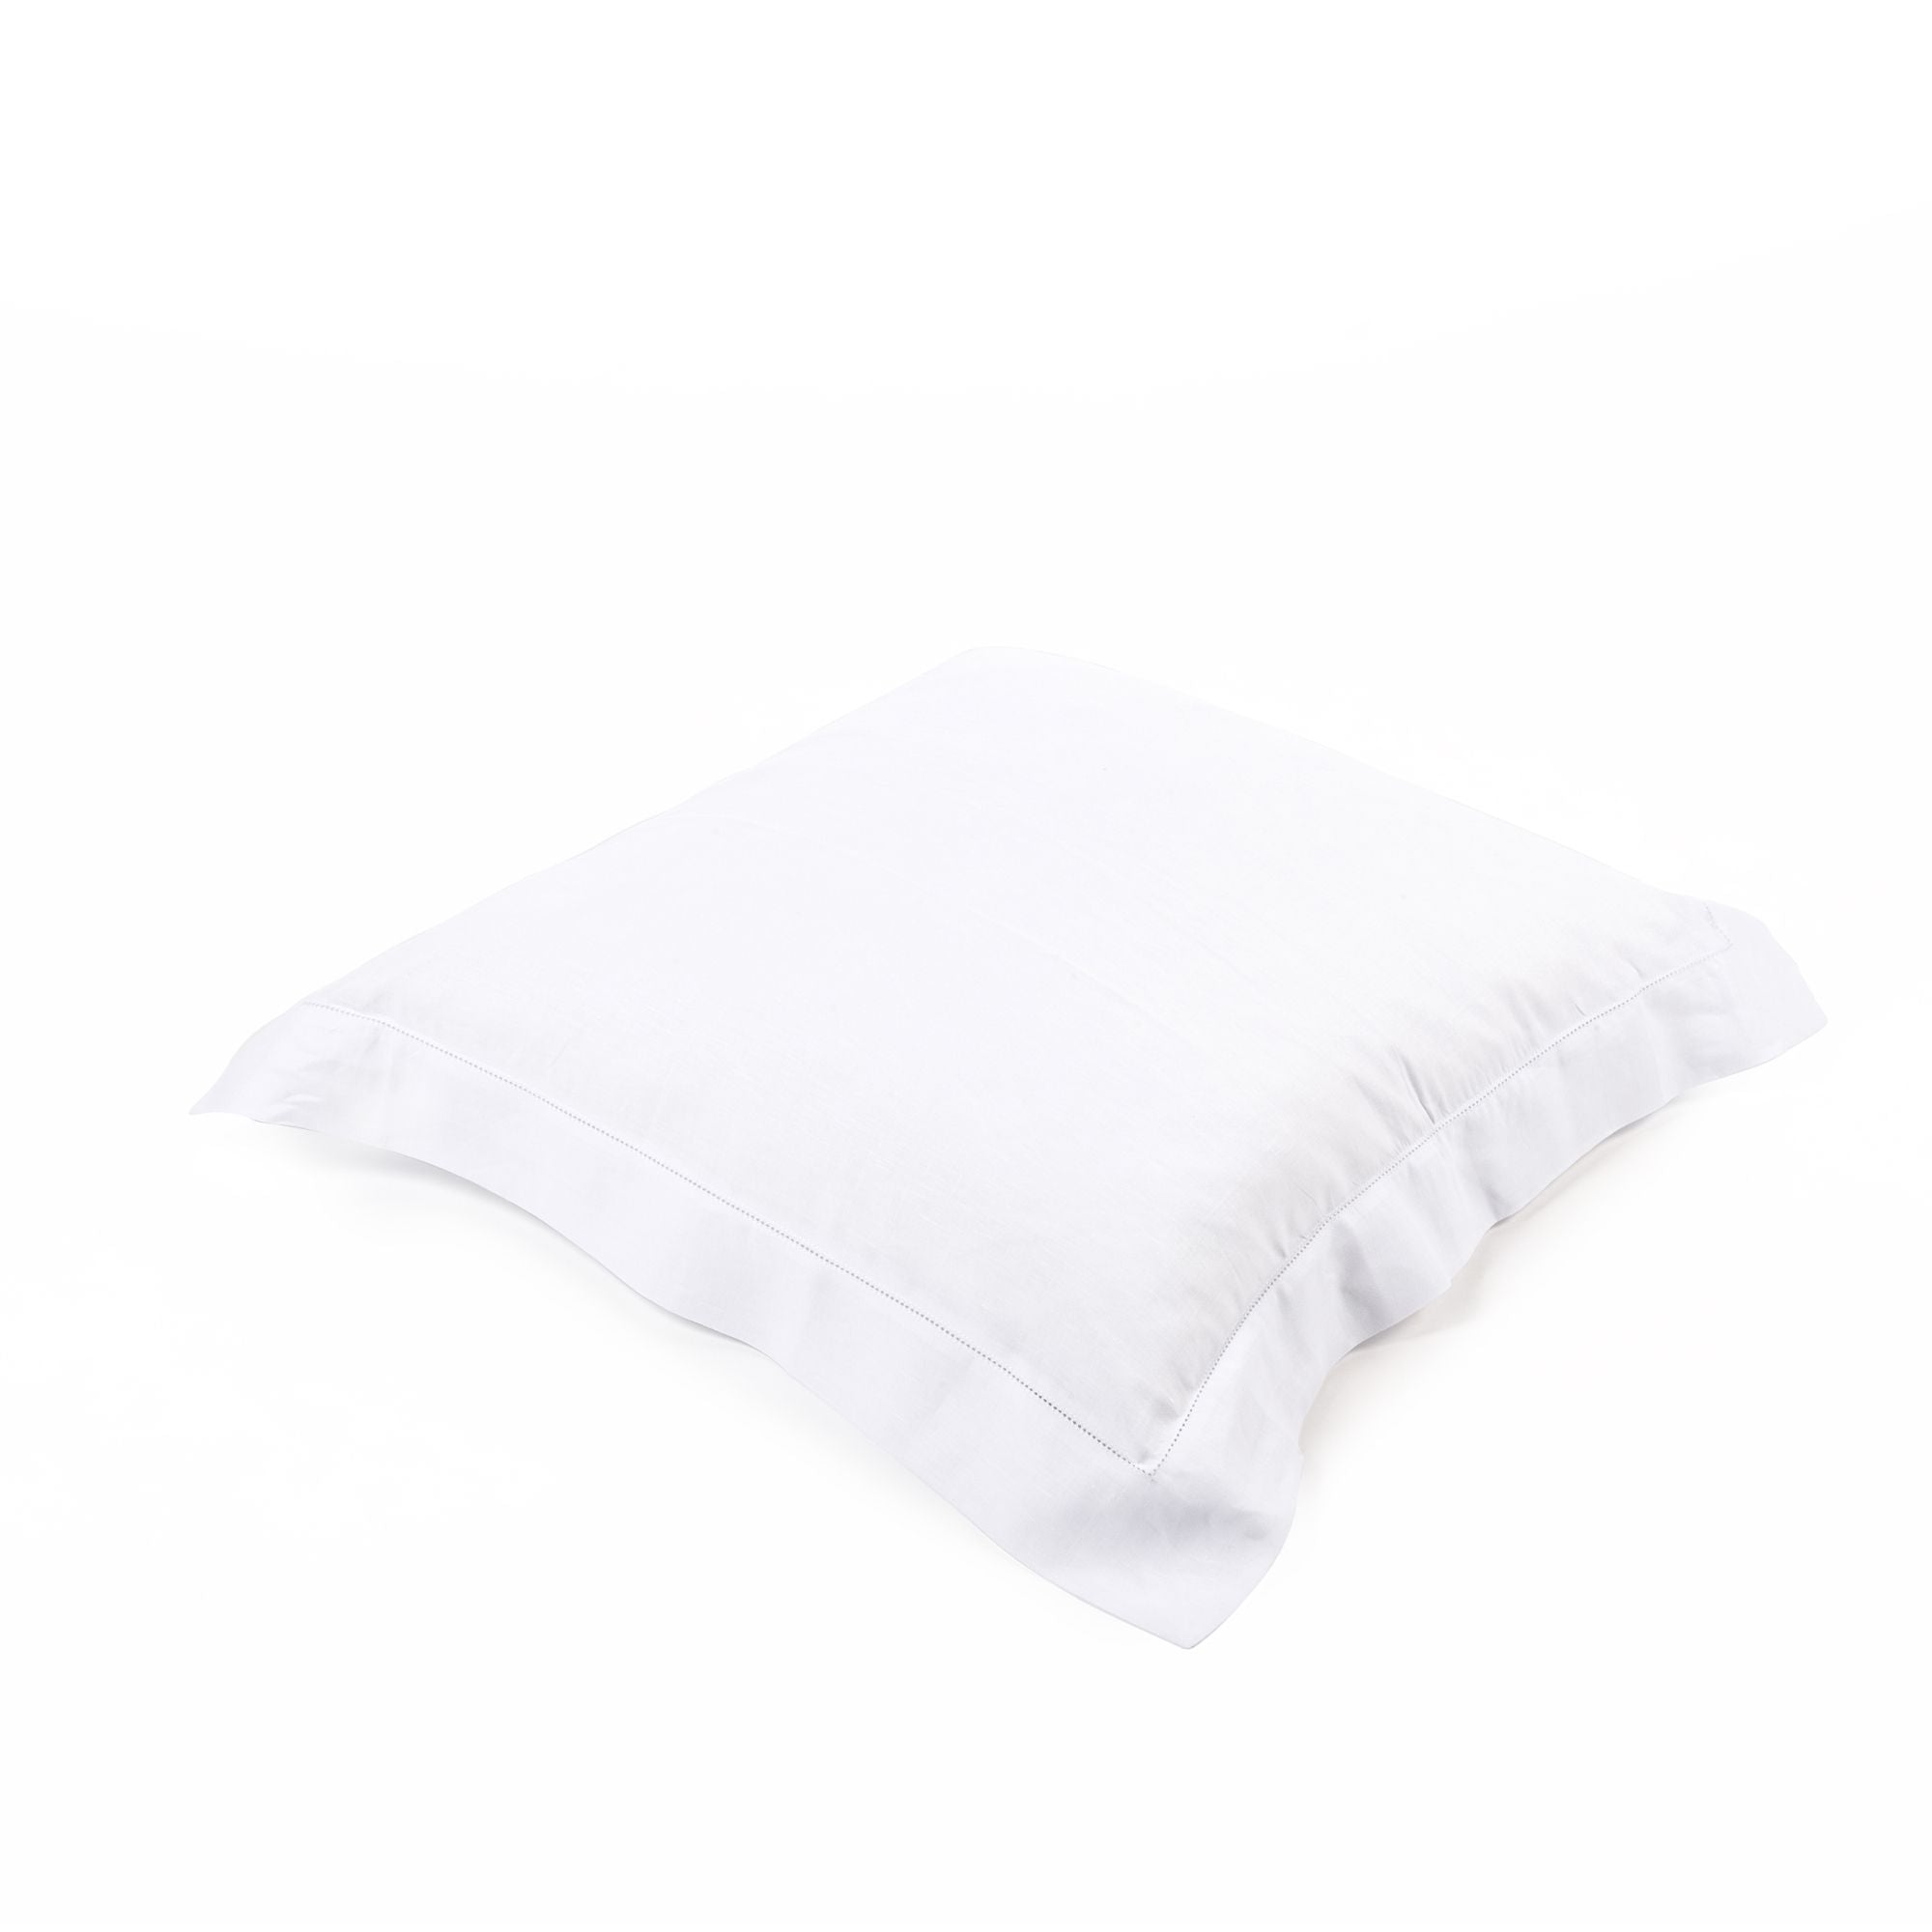 classic geneva pillow cases and shams by libeco on adorn.house